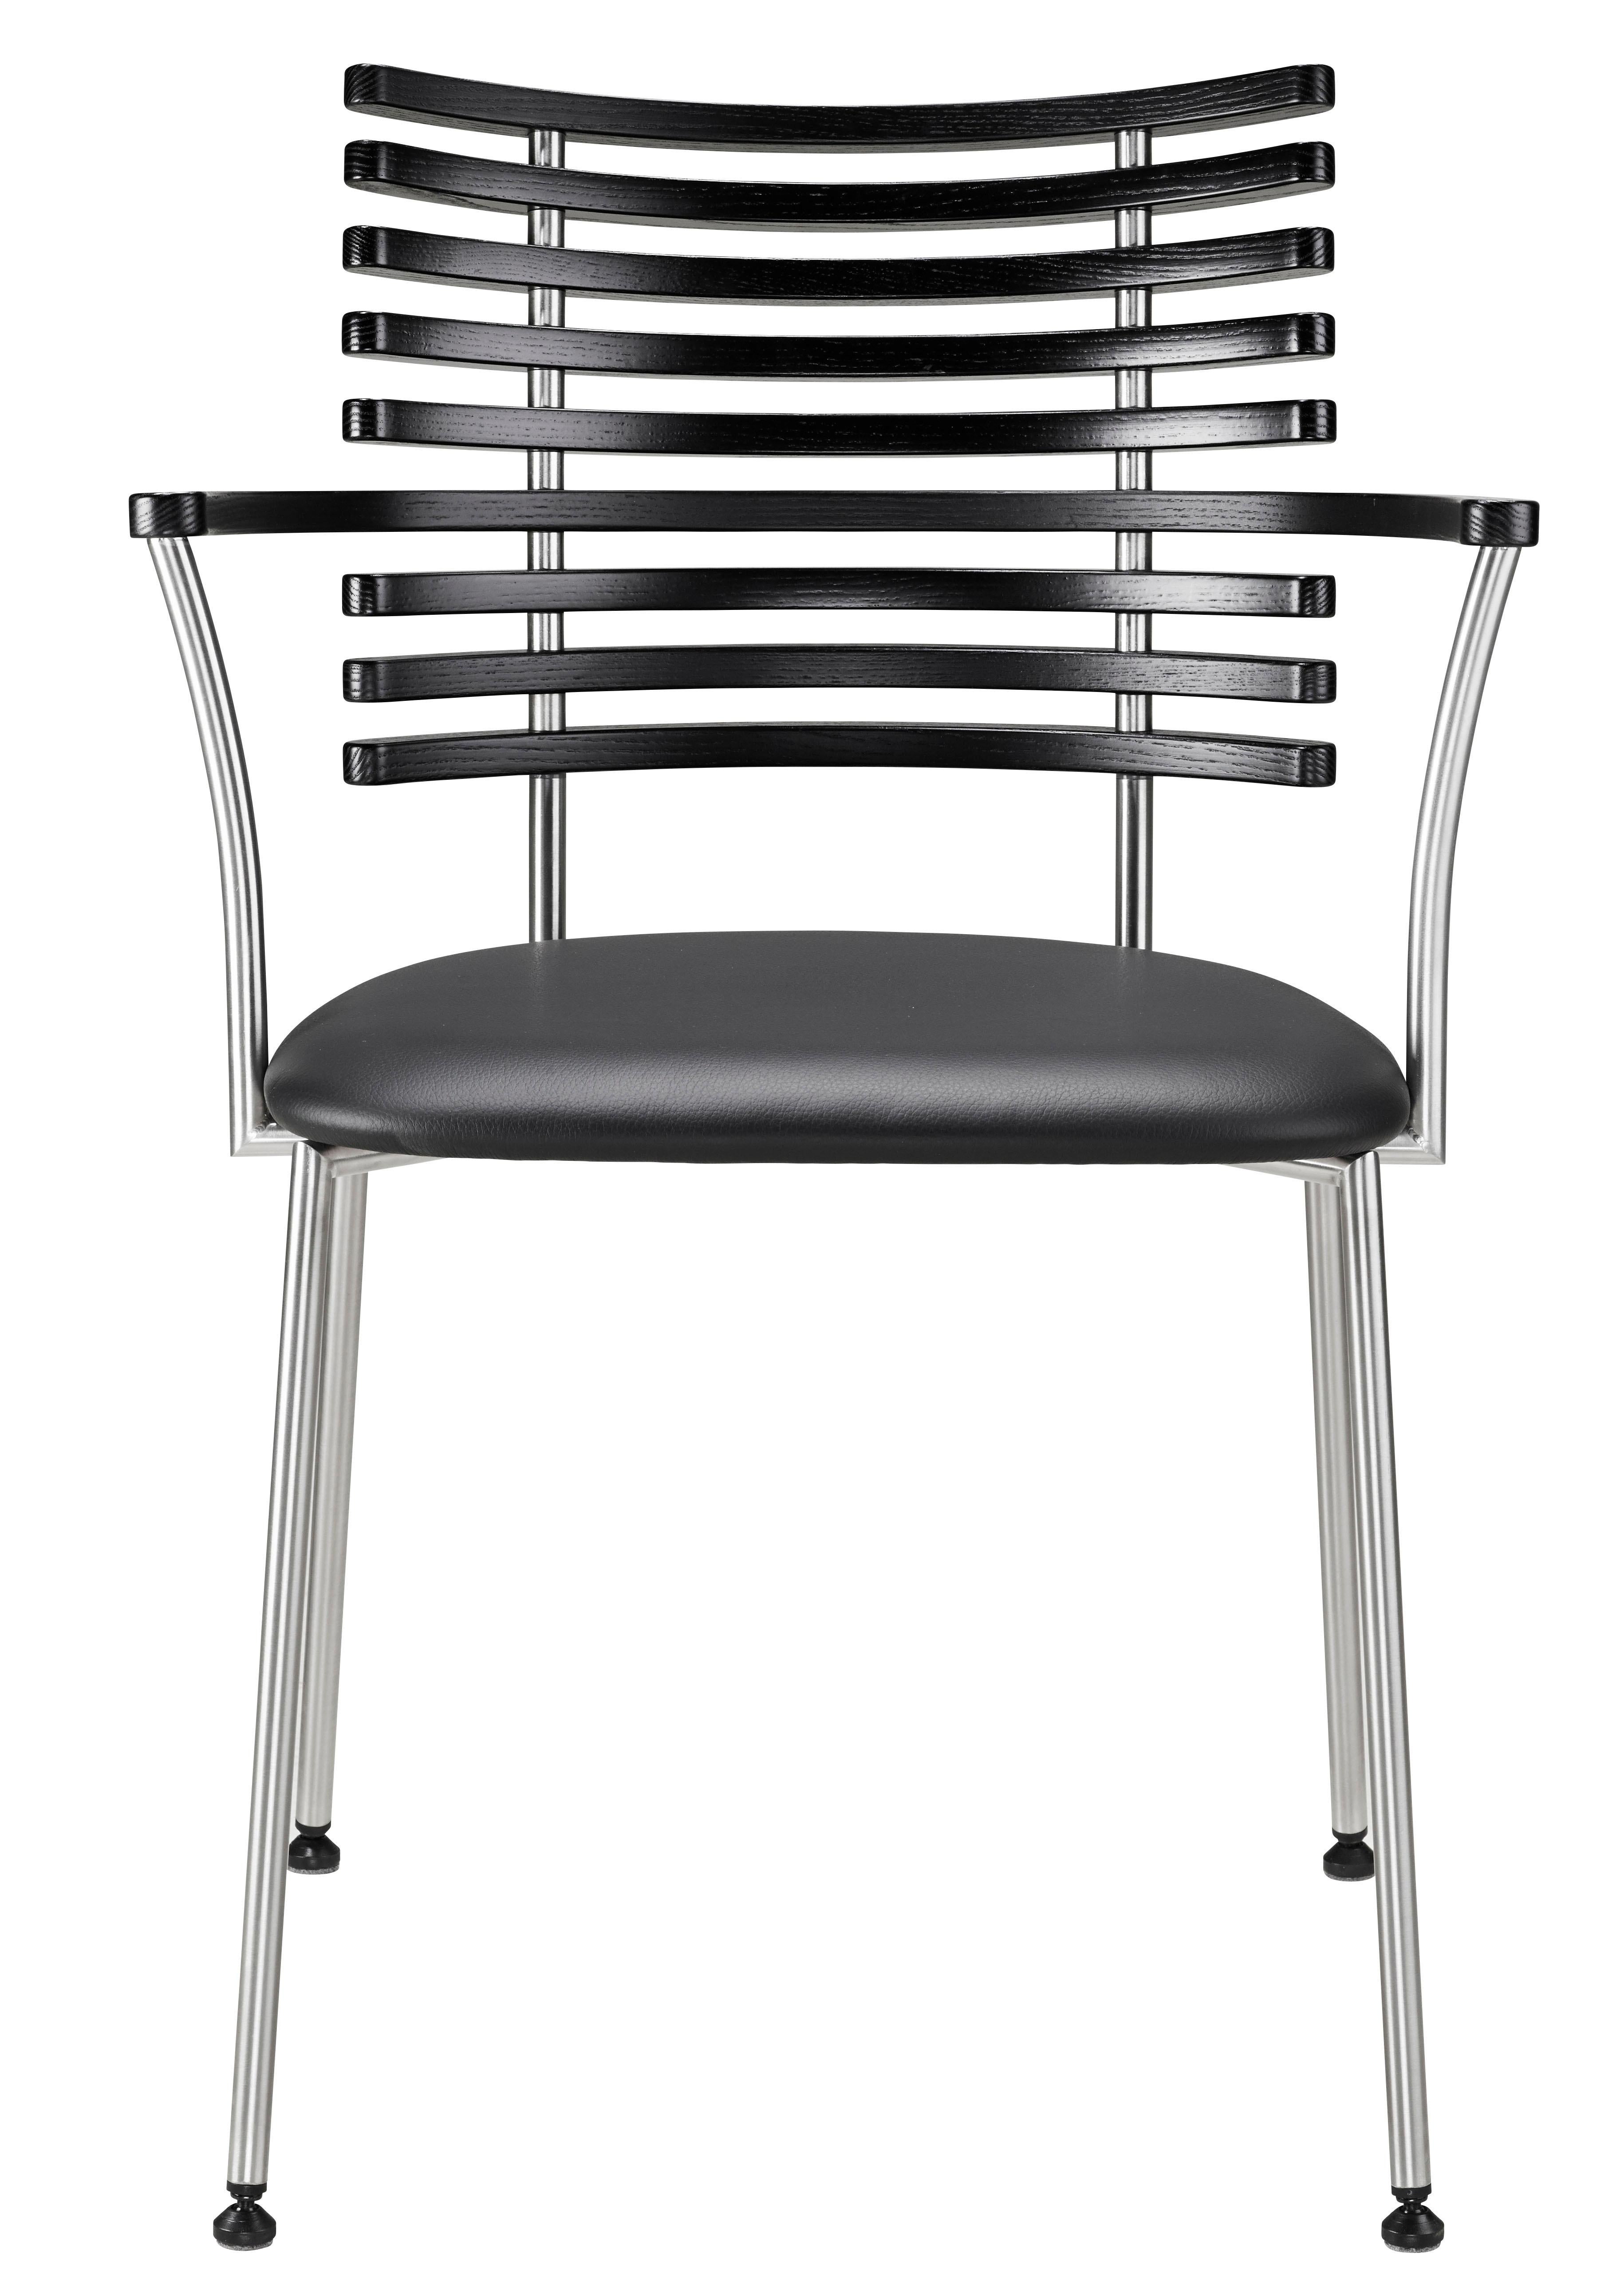 Stainless Steel SET OF 1 x Table and 6 x chairs - Design by Nissen & Gehl MDD and Henrik Lehm For Sale